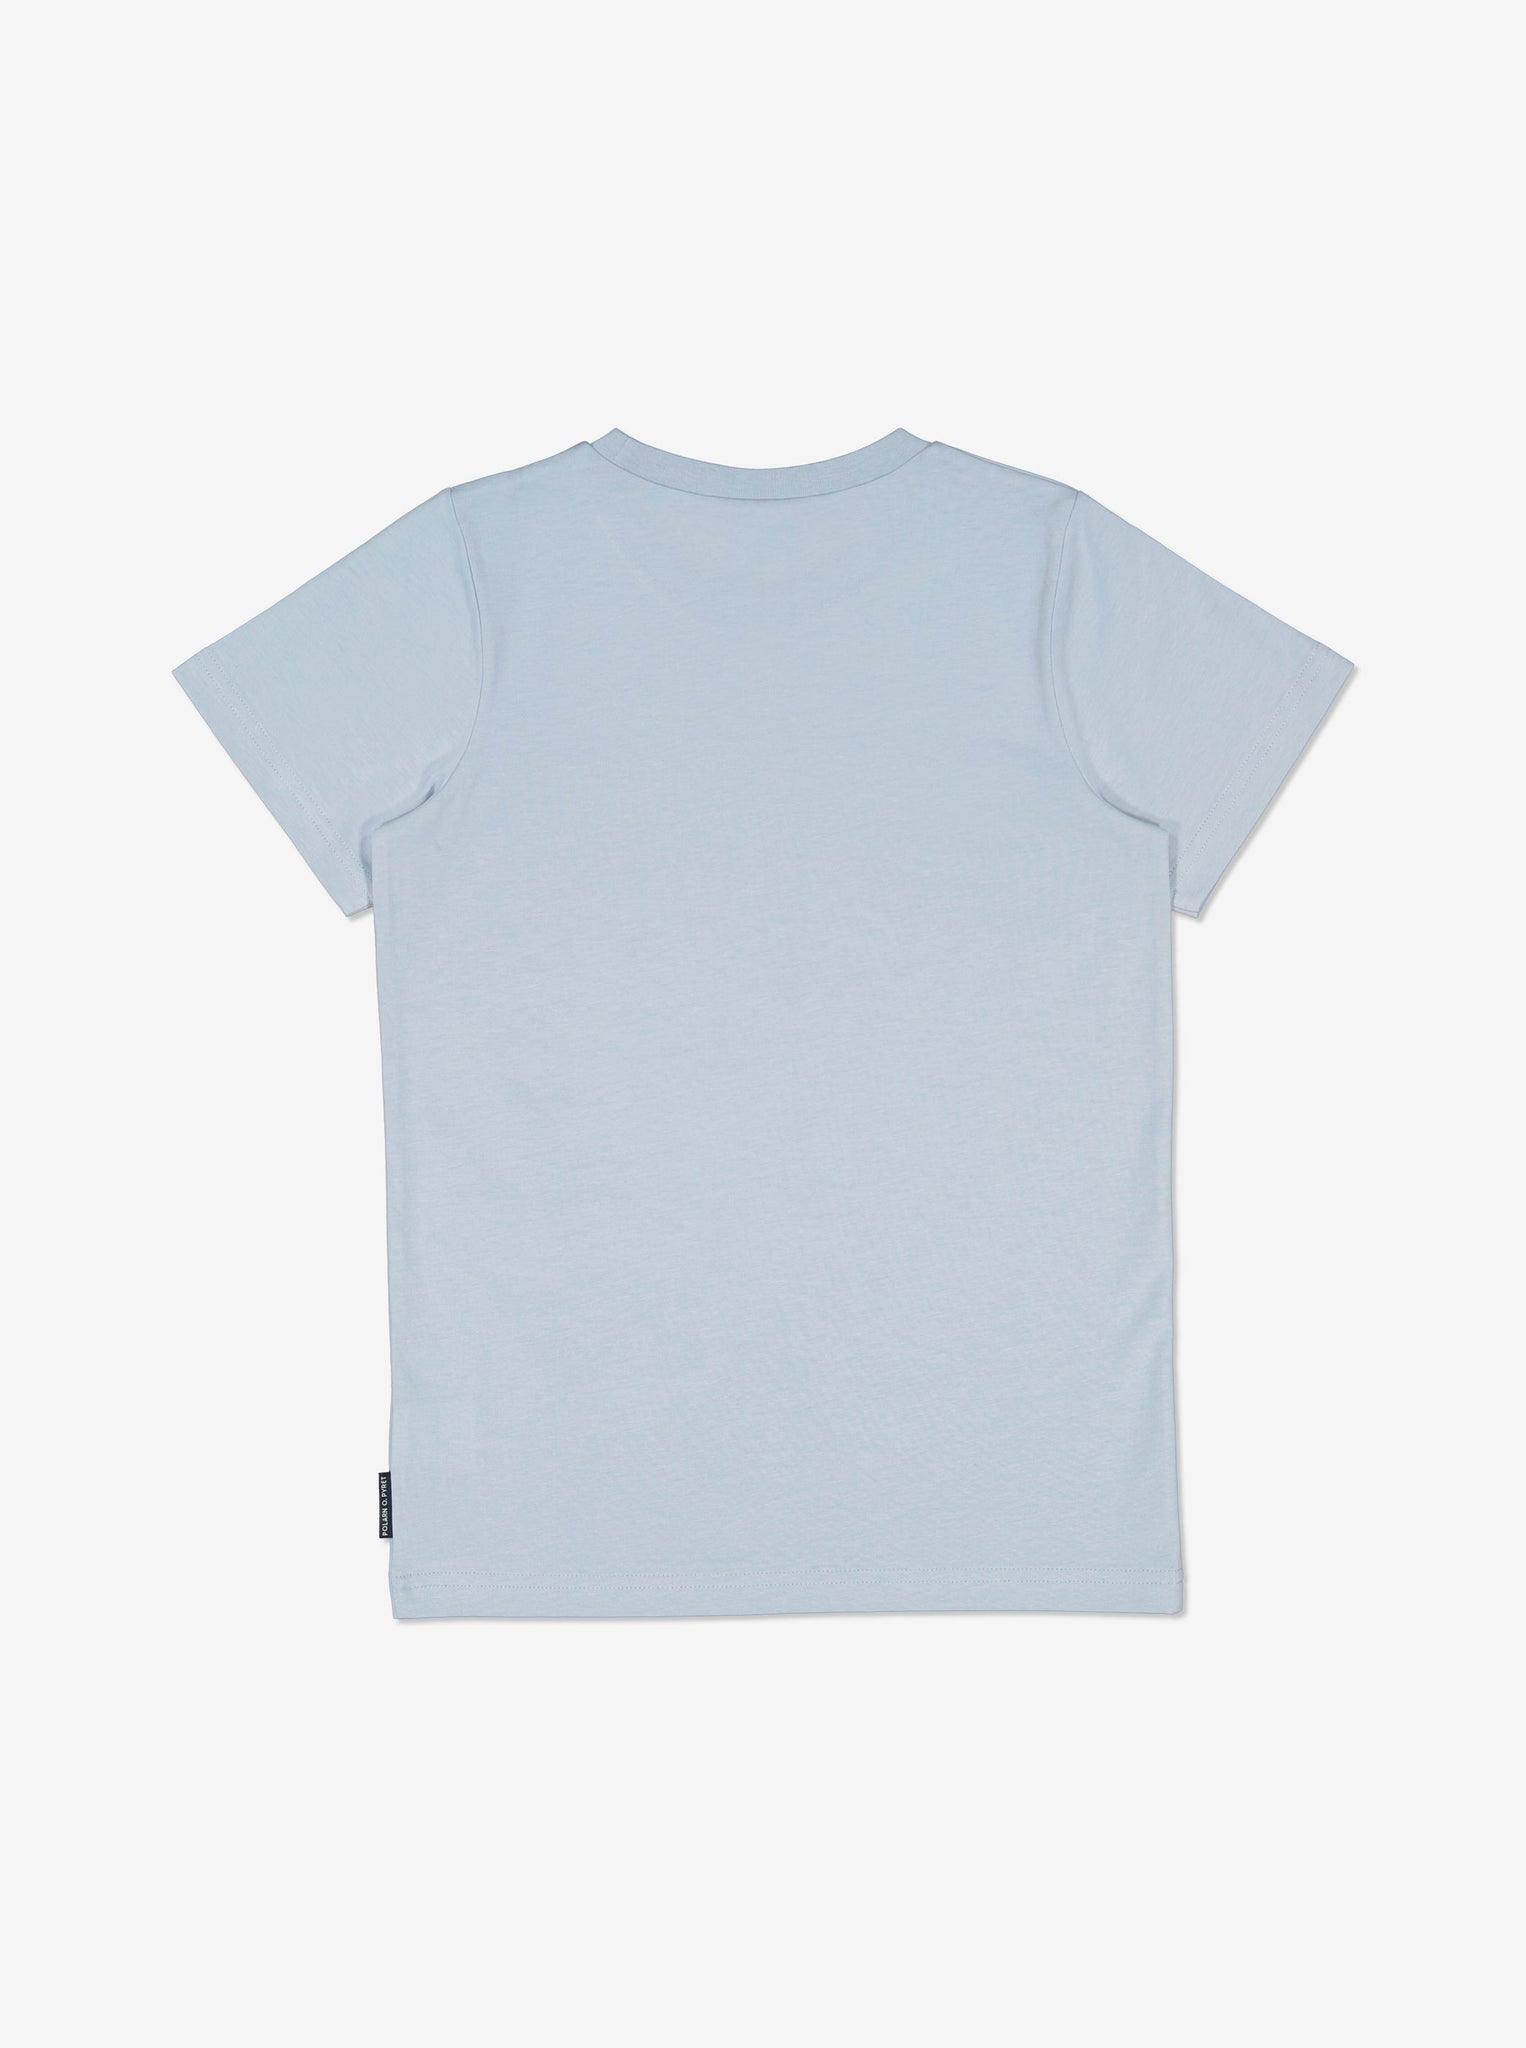  Organic Cotton Blue Kids T-Shirt from Polarn O. Pyret Kidswear. Made using sustainable materials.